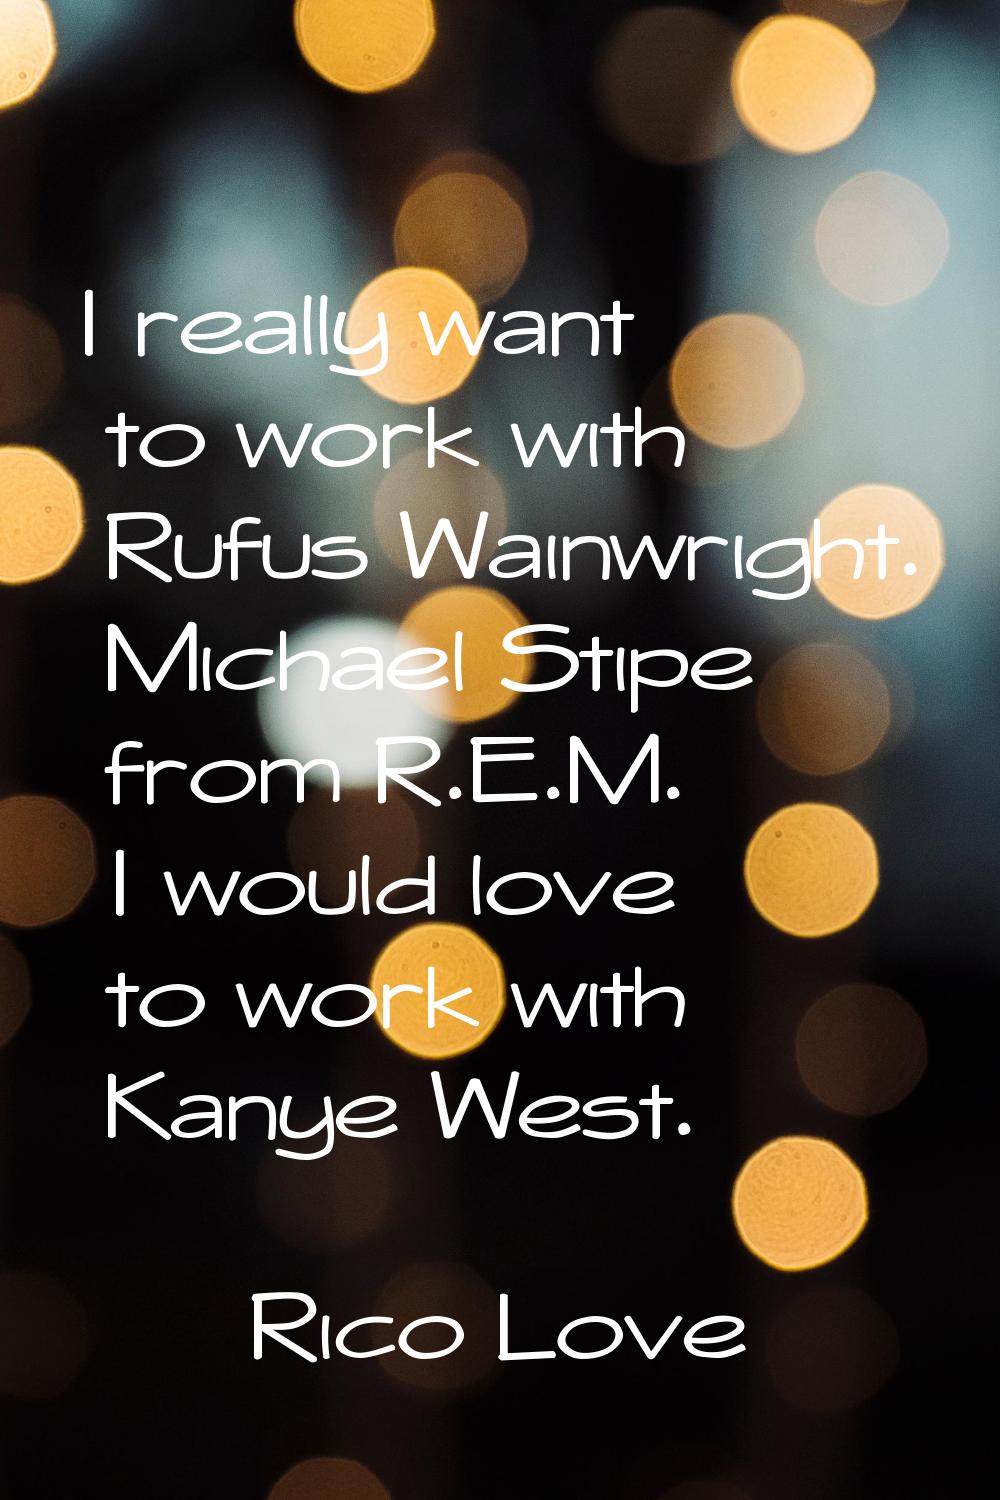 I really want to work with Rufus Wainwright. Michael Stipe from R.E.M. I would love to work with Ka